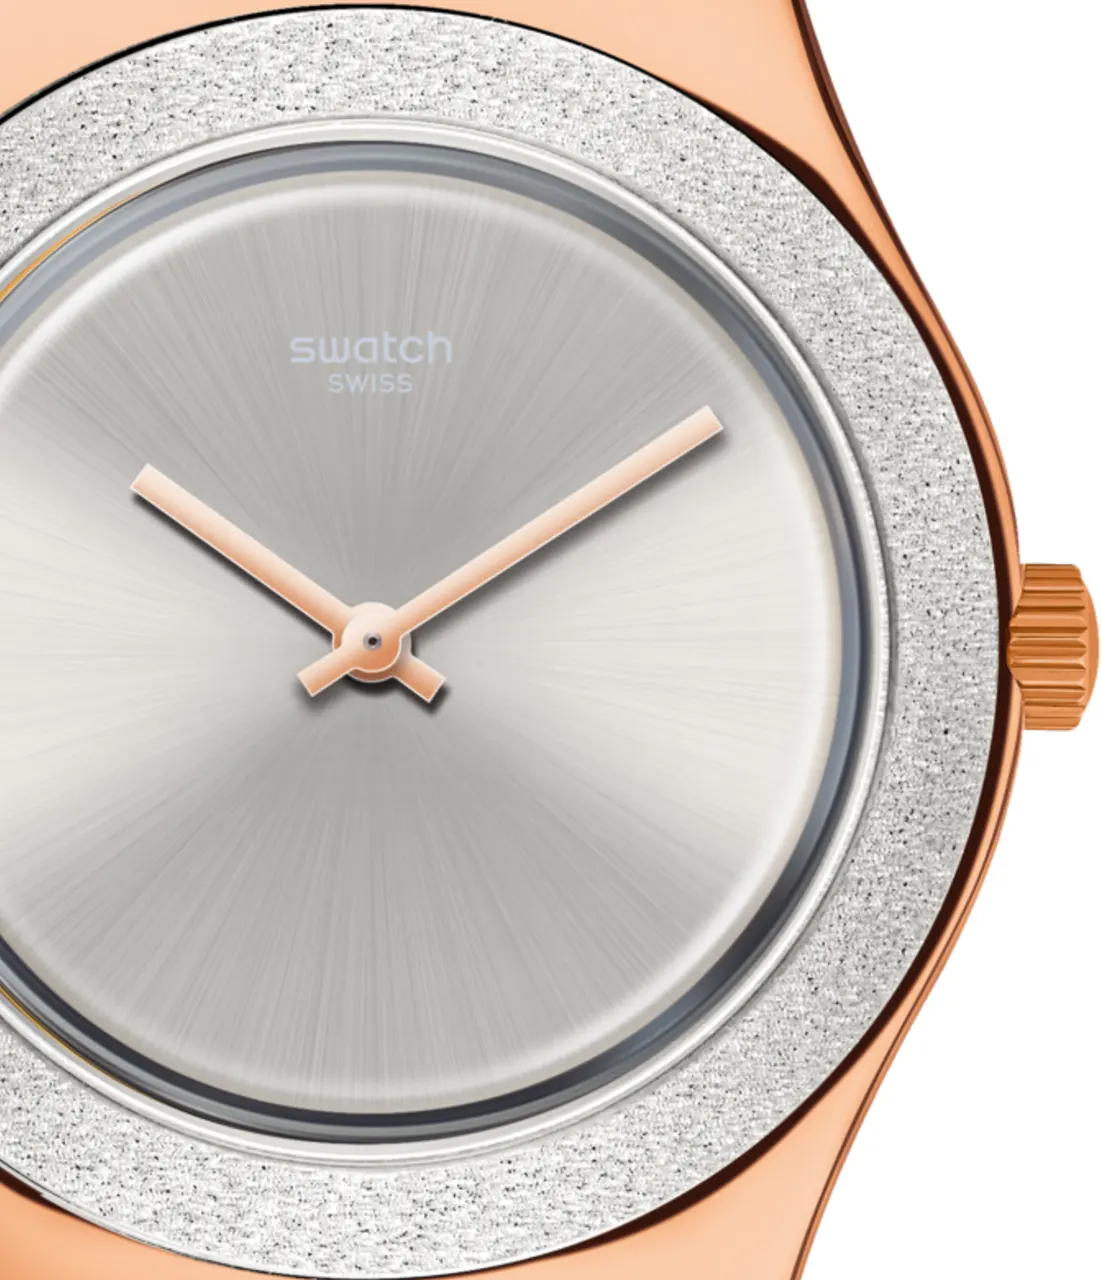 Swatch Women's Watch, Analog, leather Strap, Silver, YLG145